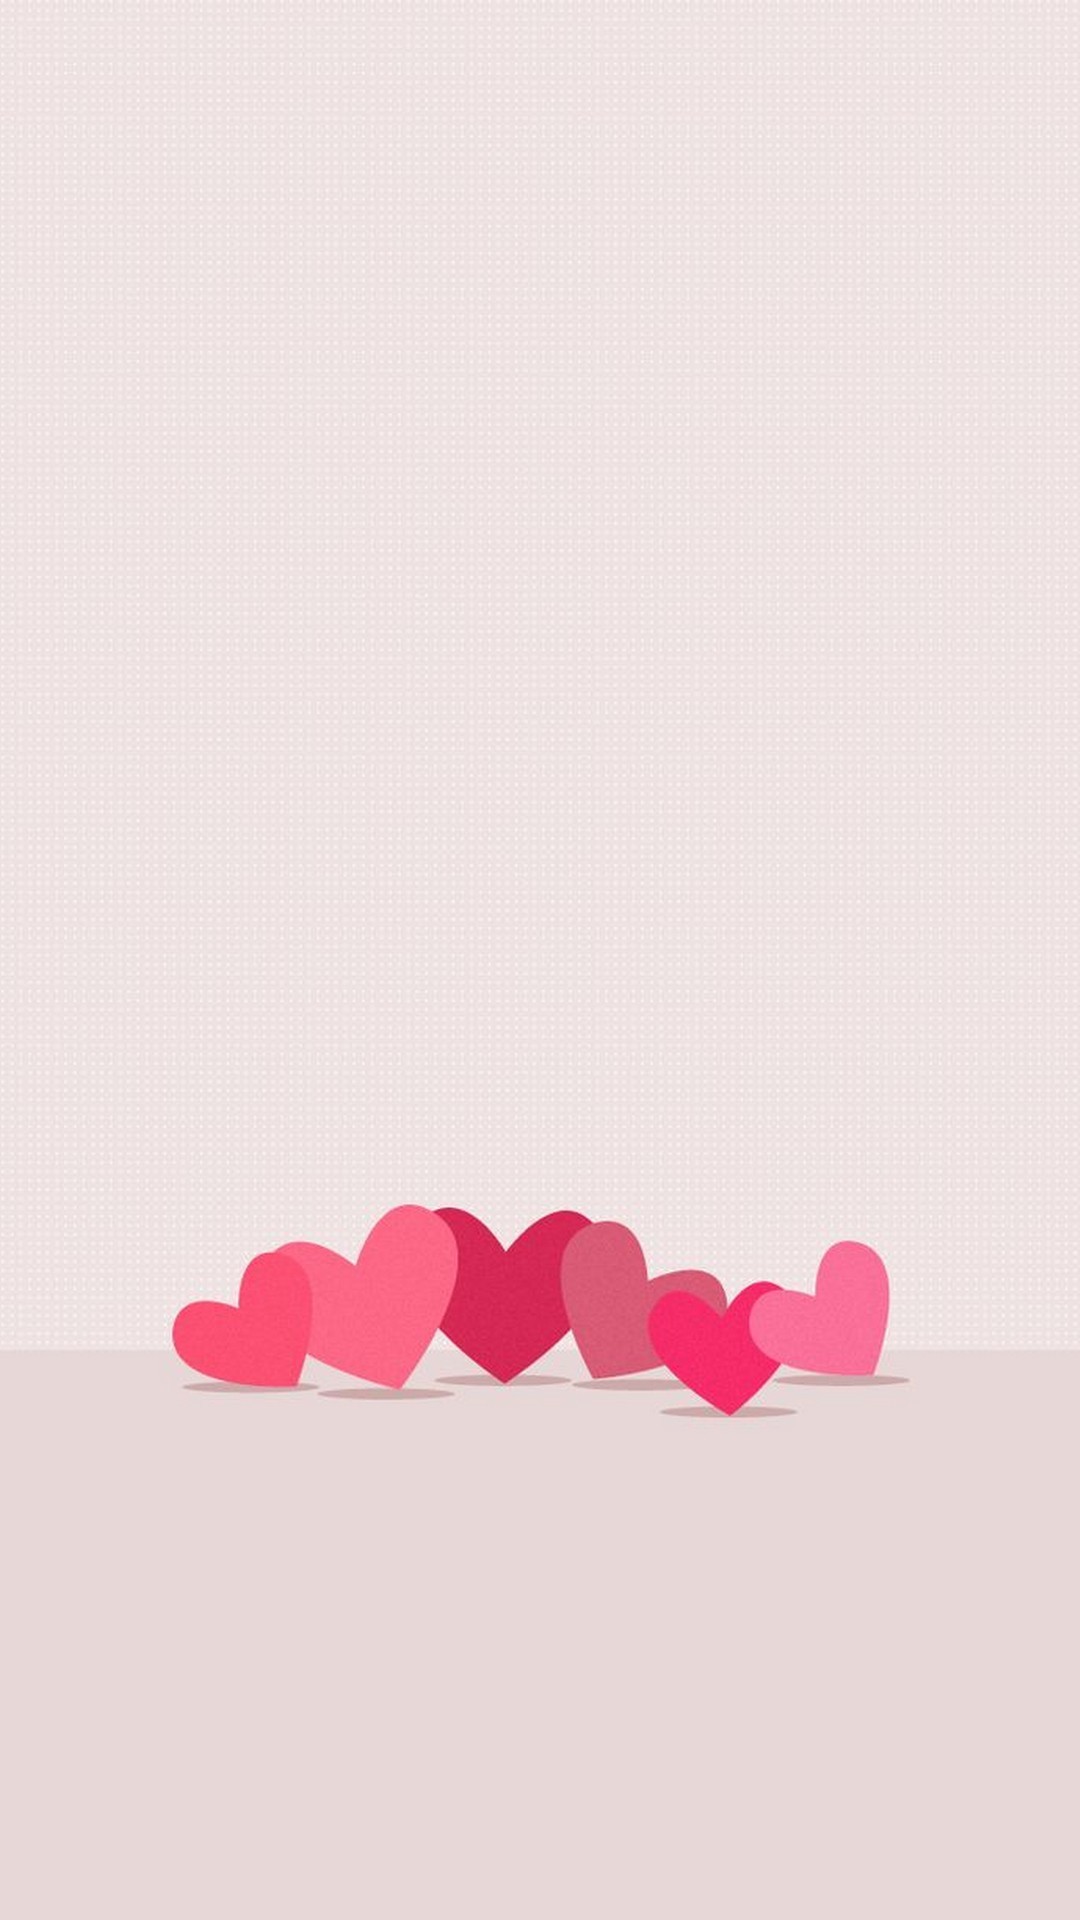 1080x1920 Valentine Wallpaper For Android Phone resolution 